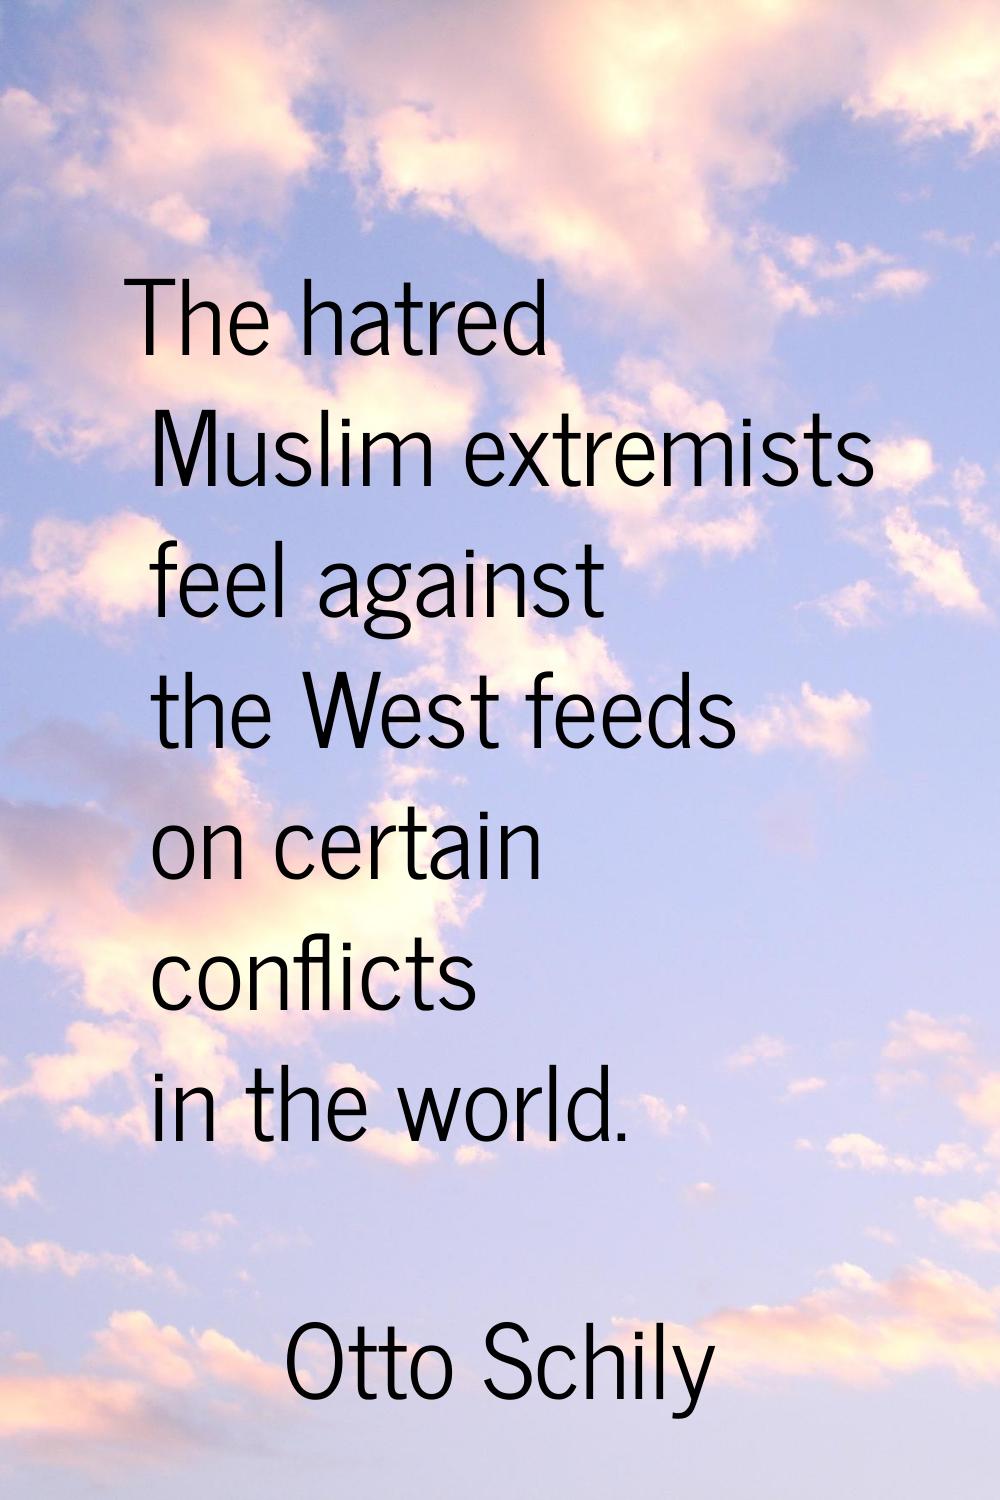 The hatred Muslim extremists feel against the West feeds on certain conflicts in the world.